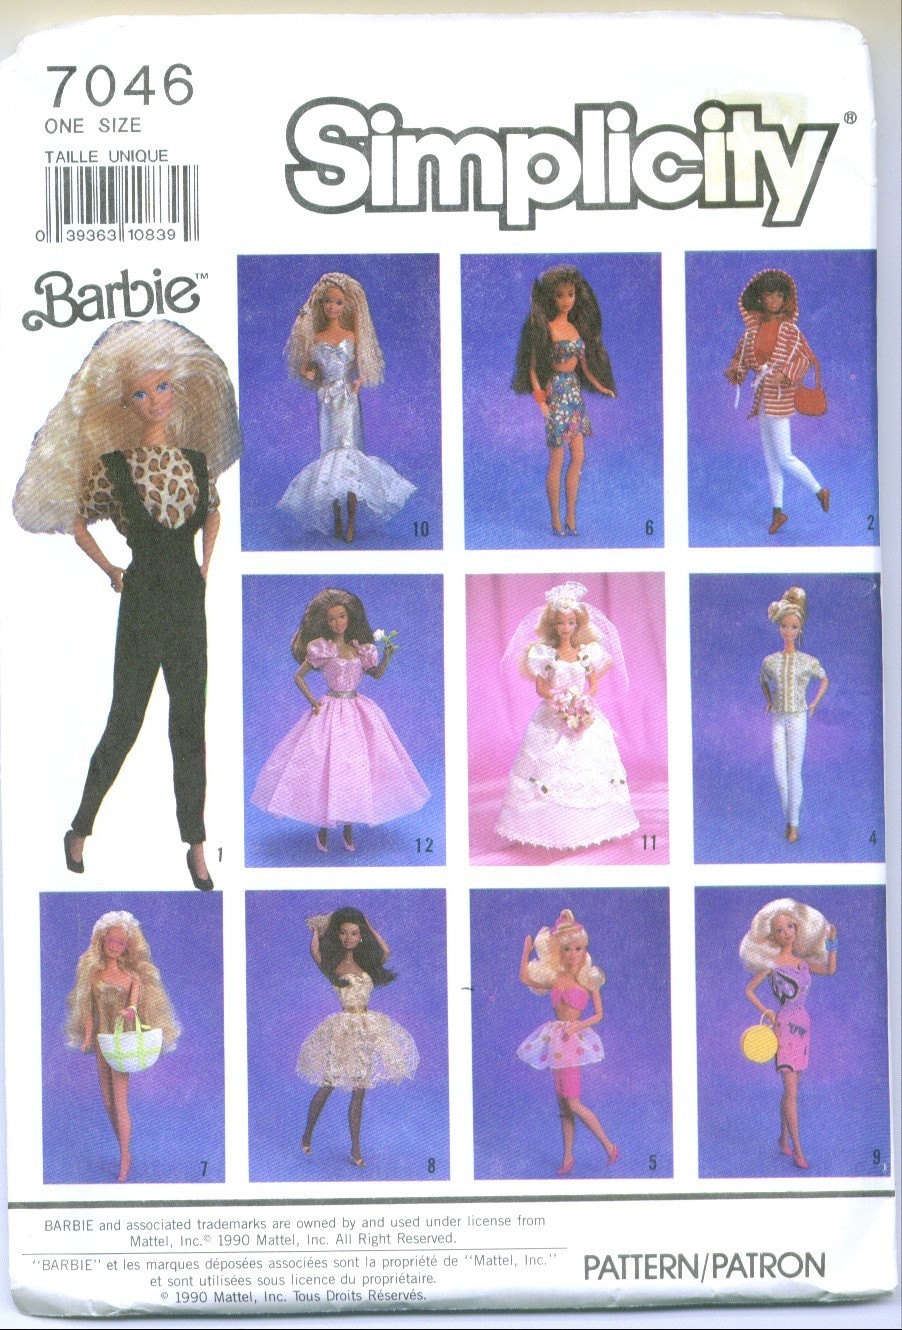 Craft Attic Resources: Barbie Crochet and Sewing Free Patterns